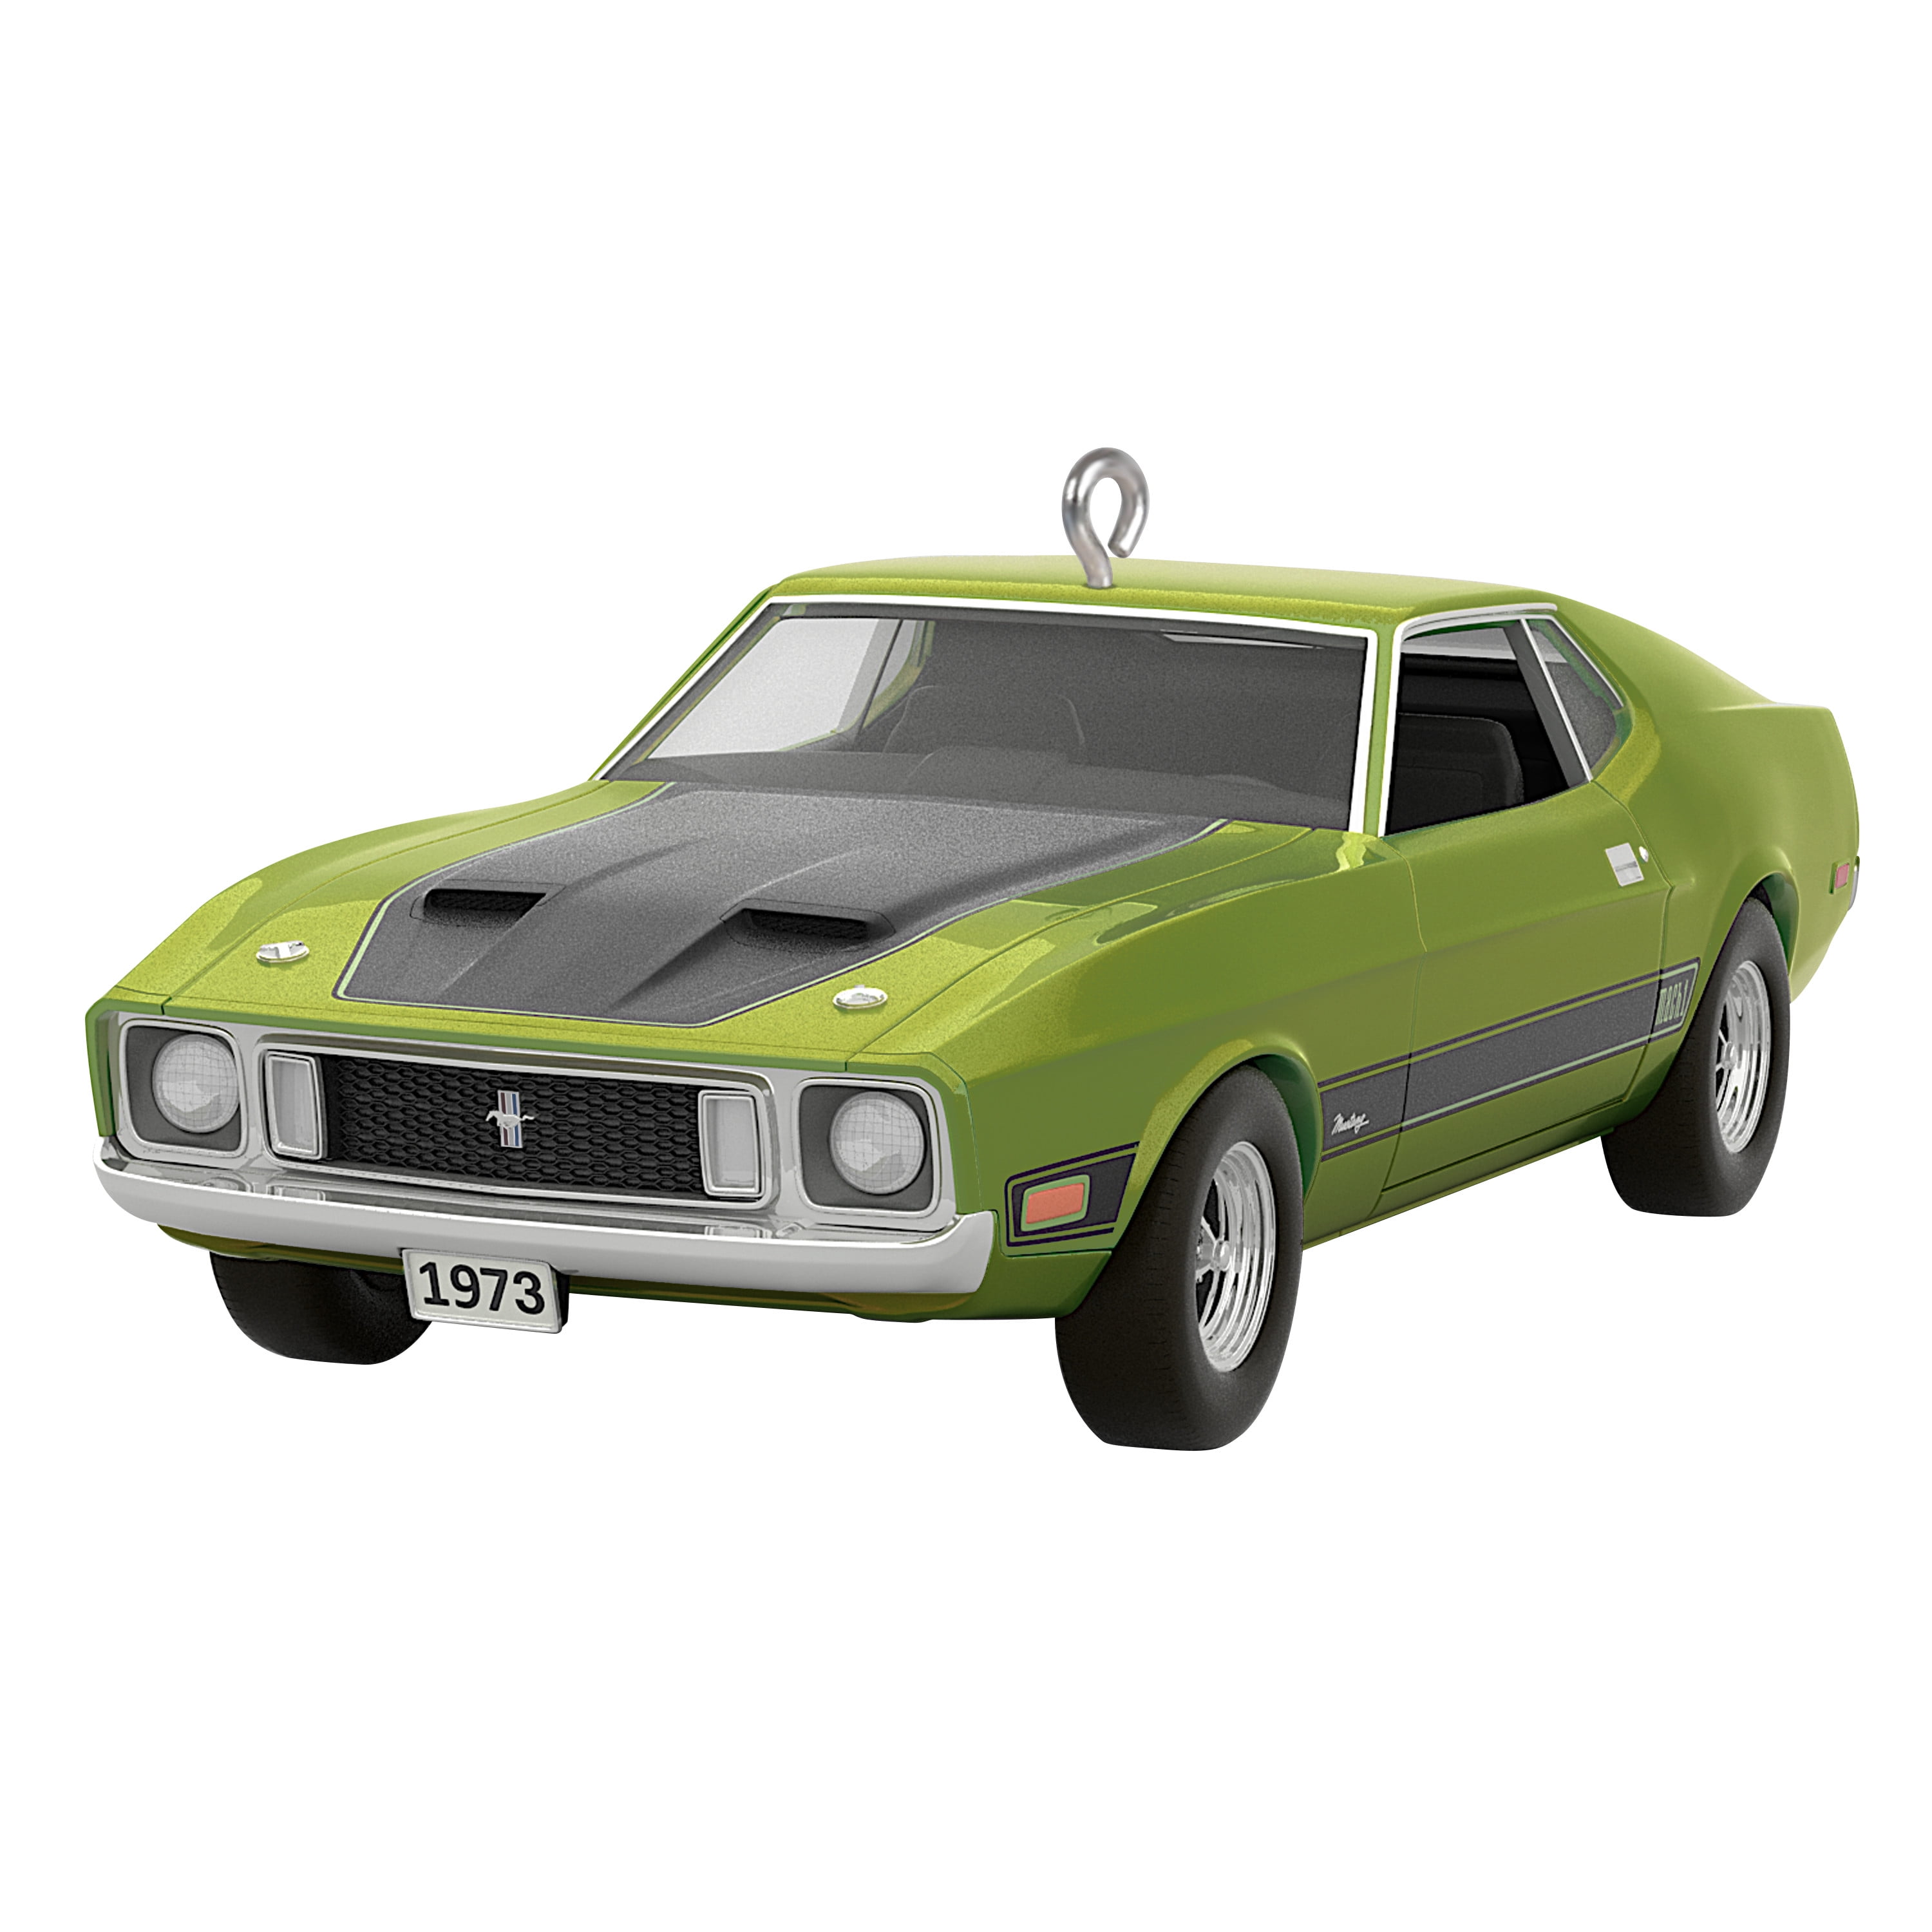 Hallmark Keepsake Christmas Ornament 2023, Classic American Cars 1973 Ford  Mustang Mach 1 2023, Metal Ornament, Gifts for Car Collectors. .17 lbs.